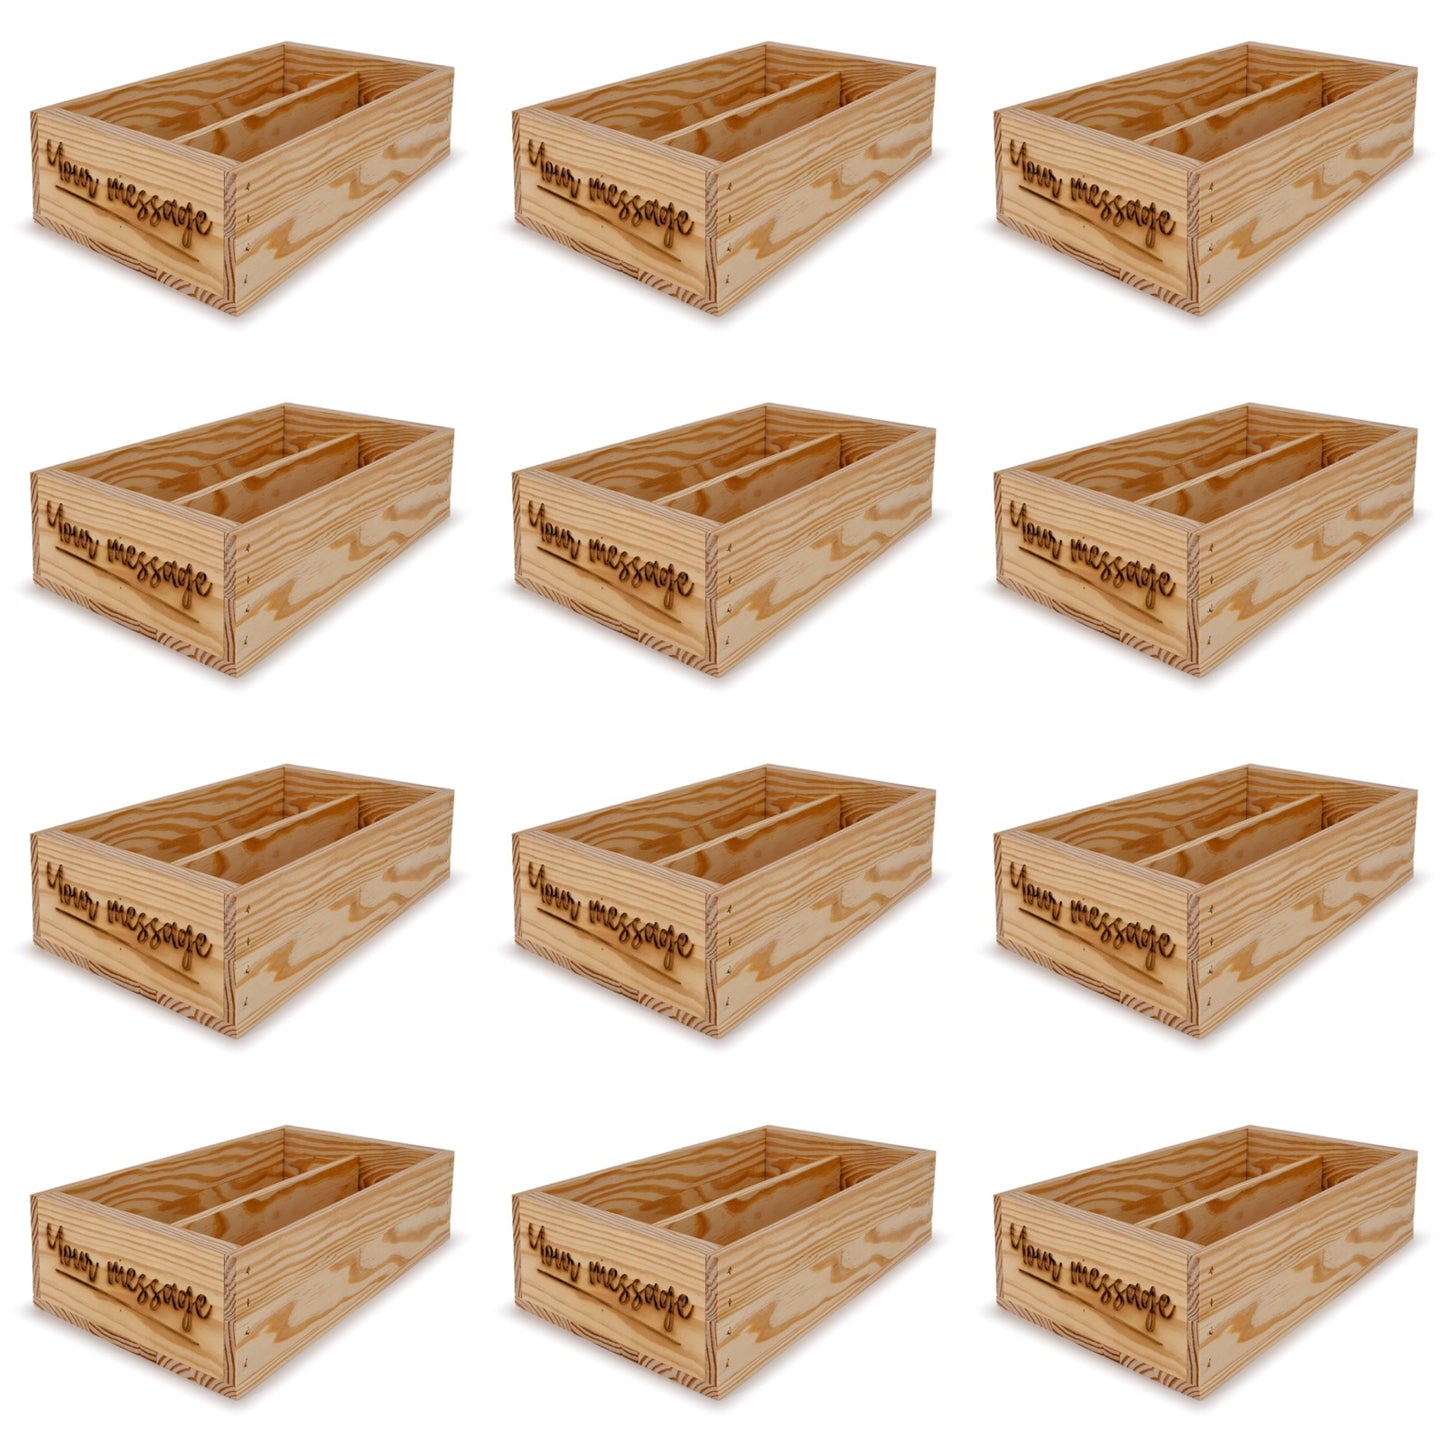 12-2 Bottle wine crates with custom message 13x7.5x3.5